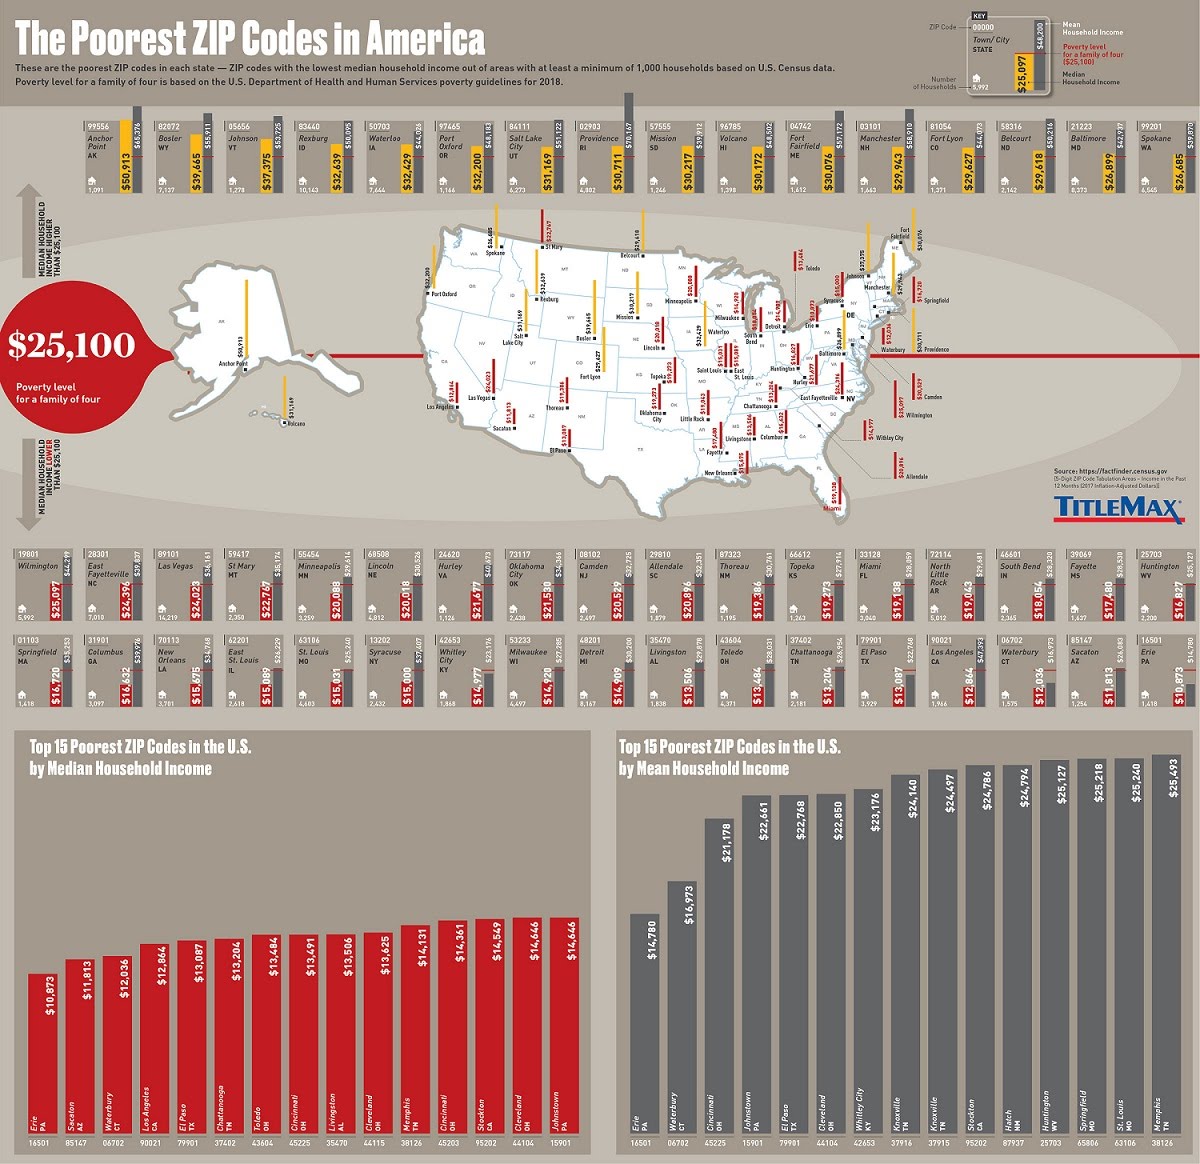 The Poorest ZIP Codes in America #infographic